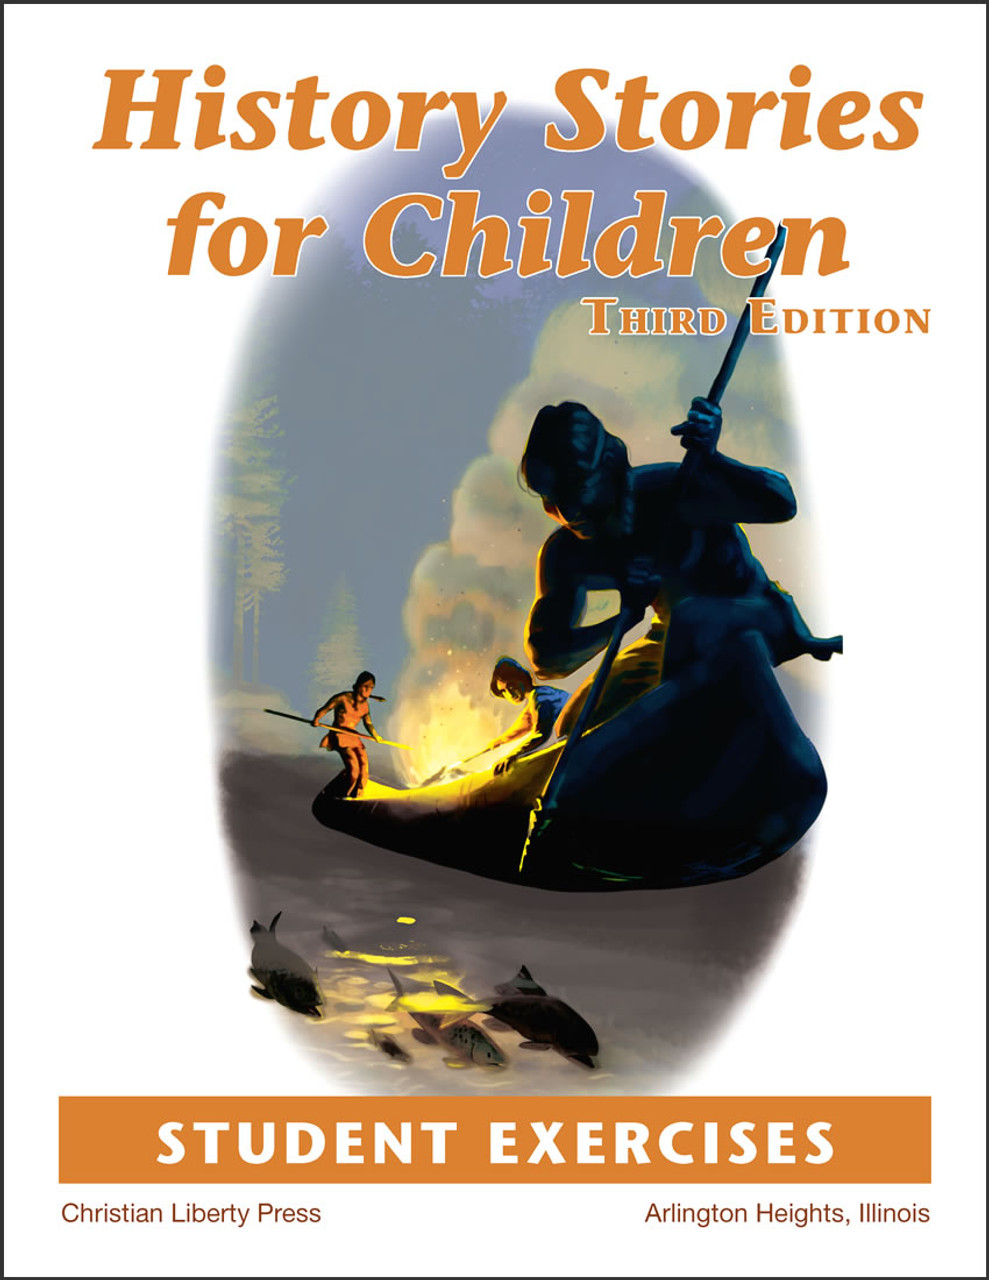 History Stories for Children, 3rd edition - Student Exercises